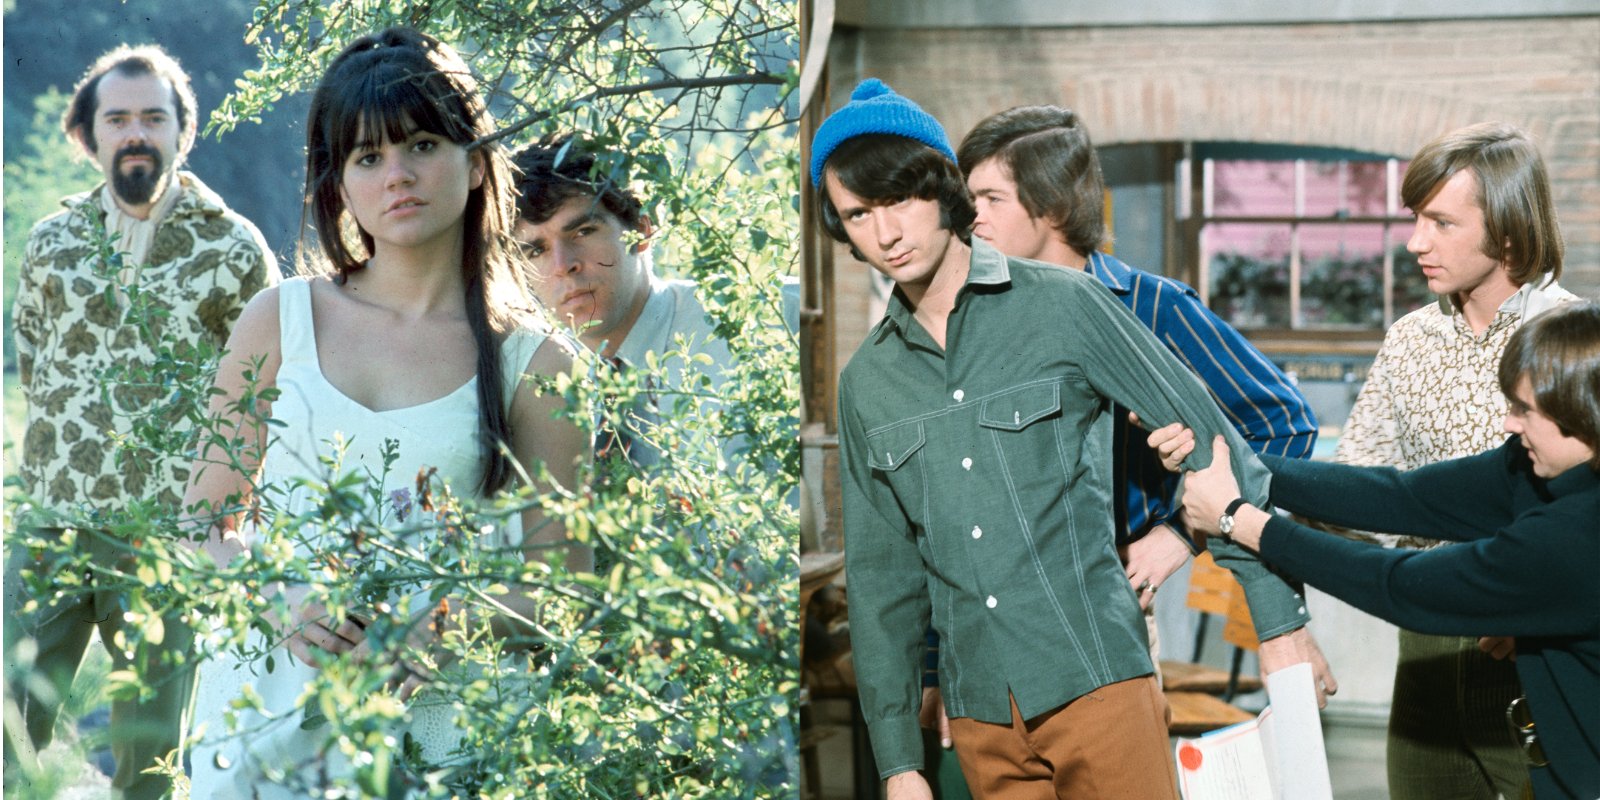 The Stone Poneys and The Monkees in side by side photographs.